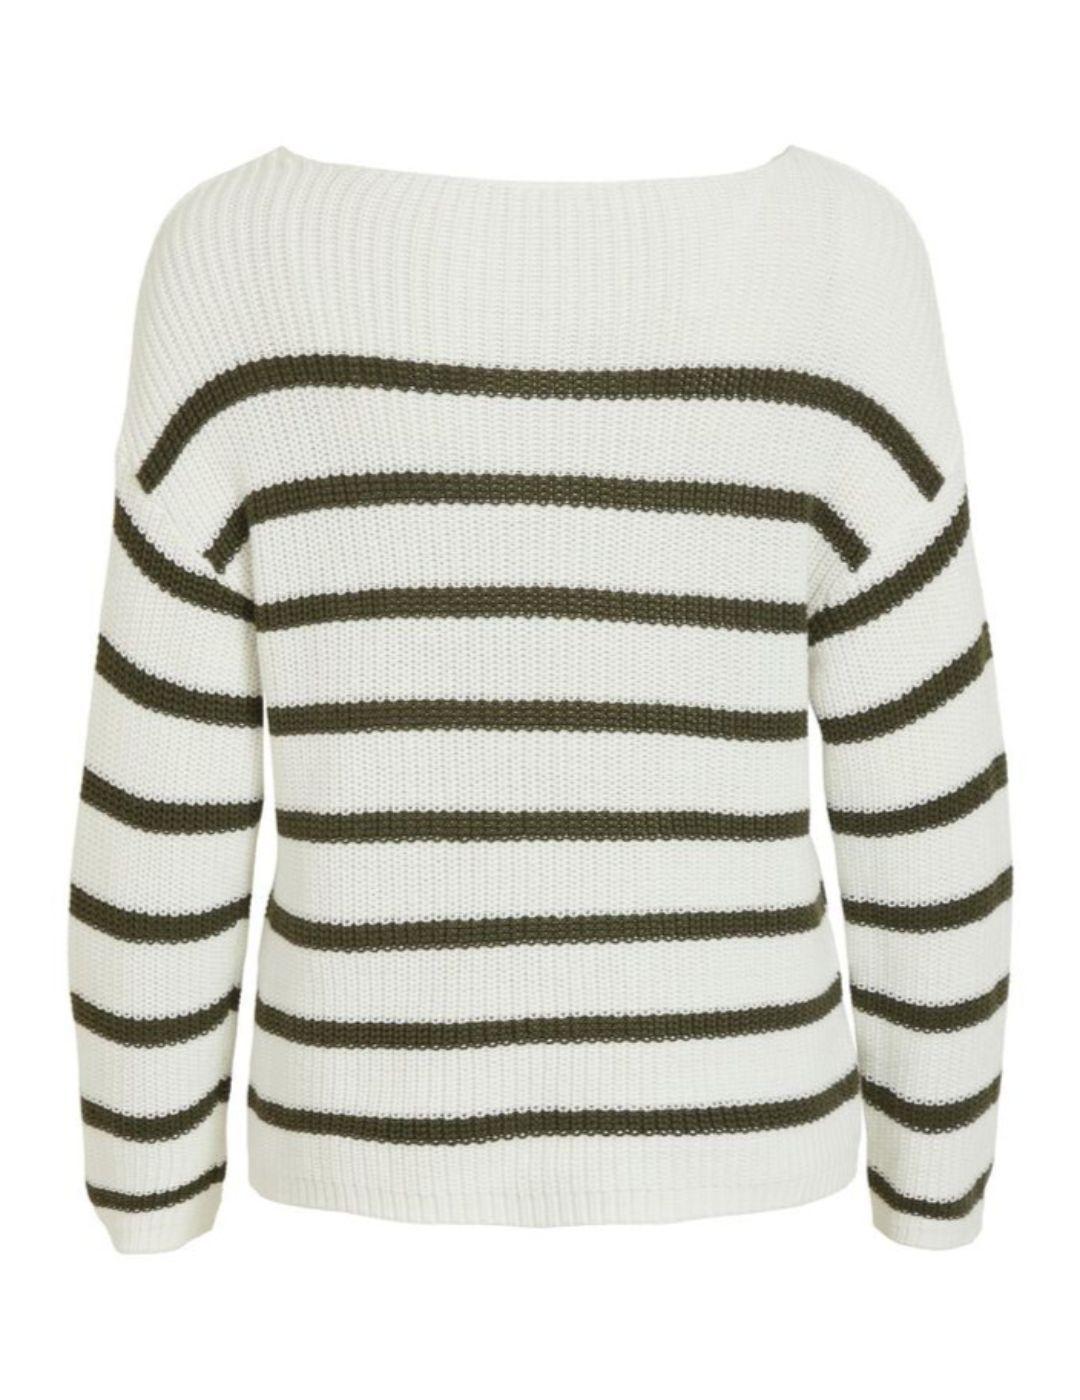 VIRUSH KNIT BOATNECK L/S TOP WHITE FOREST-X